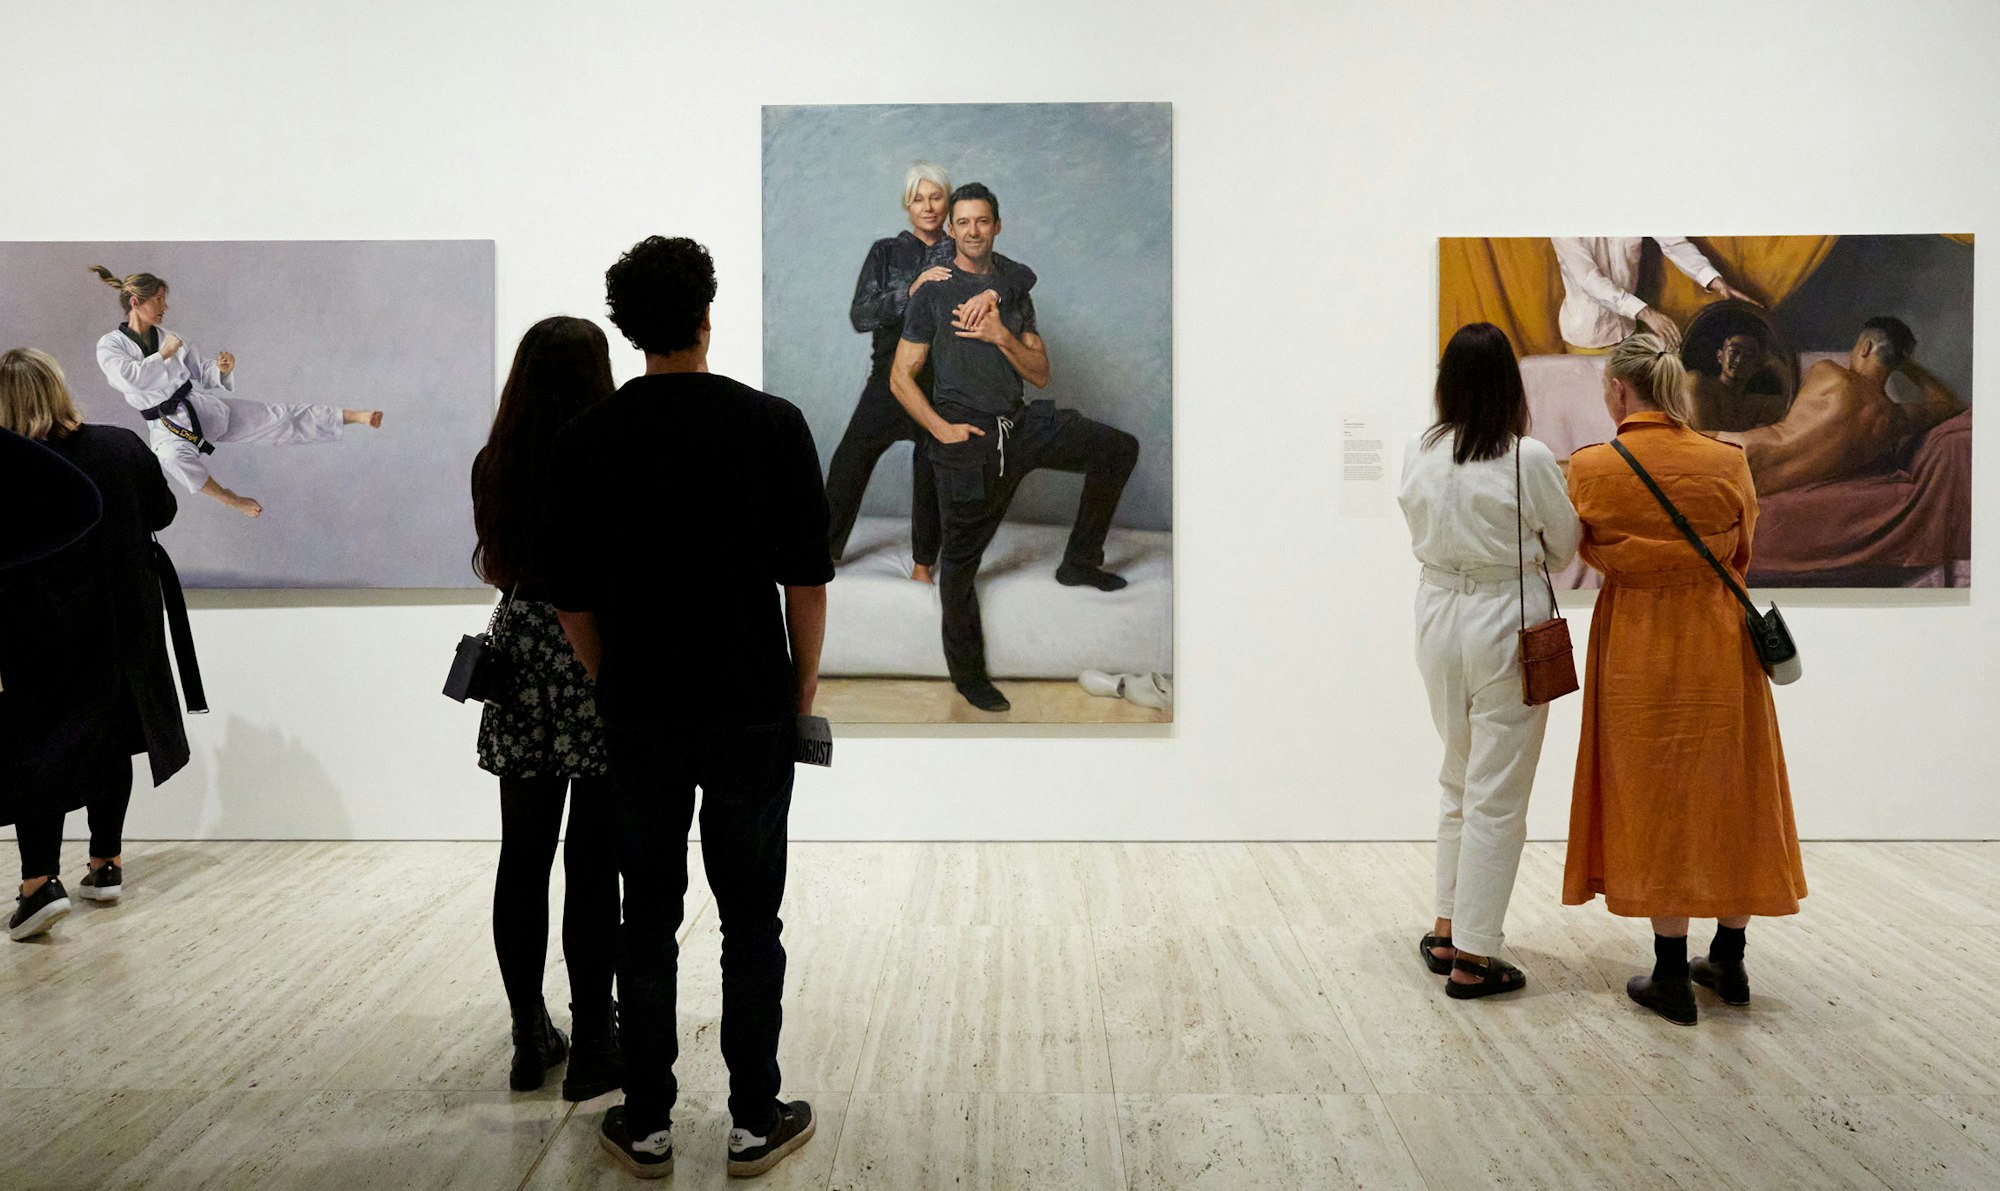 People stand in front of three large portrait paintings on a gallery wall